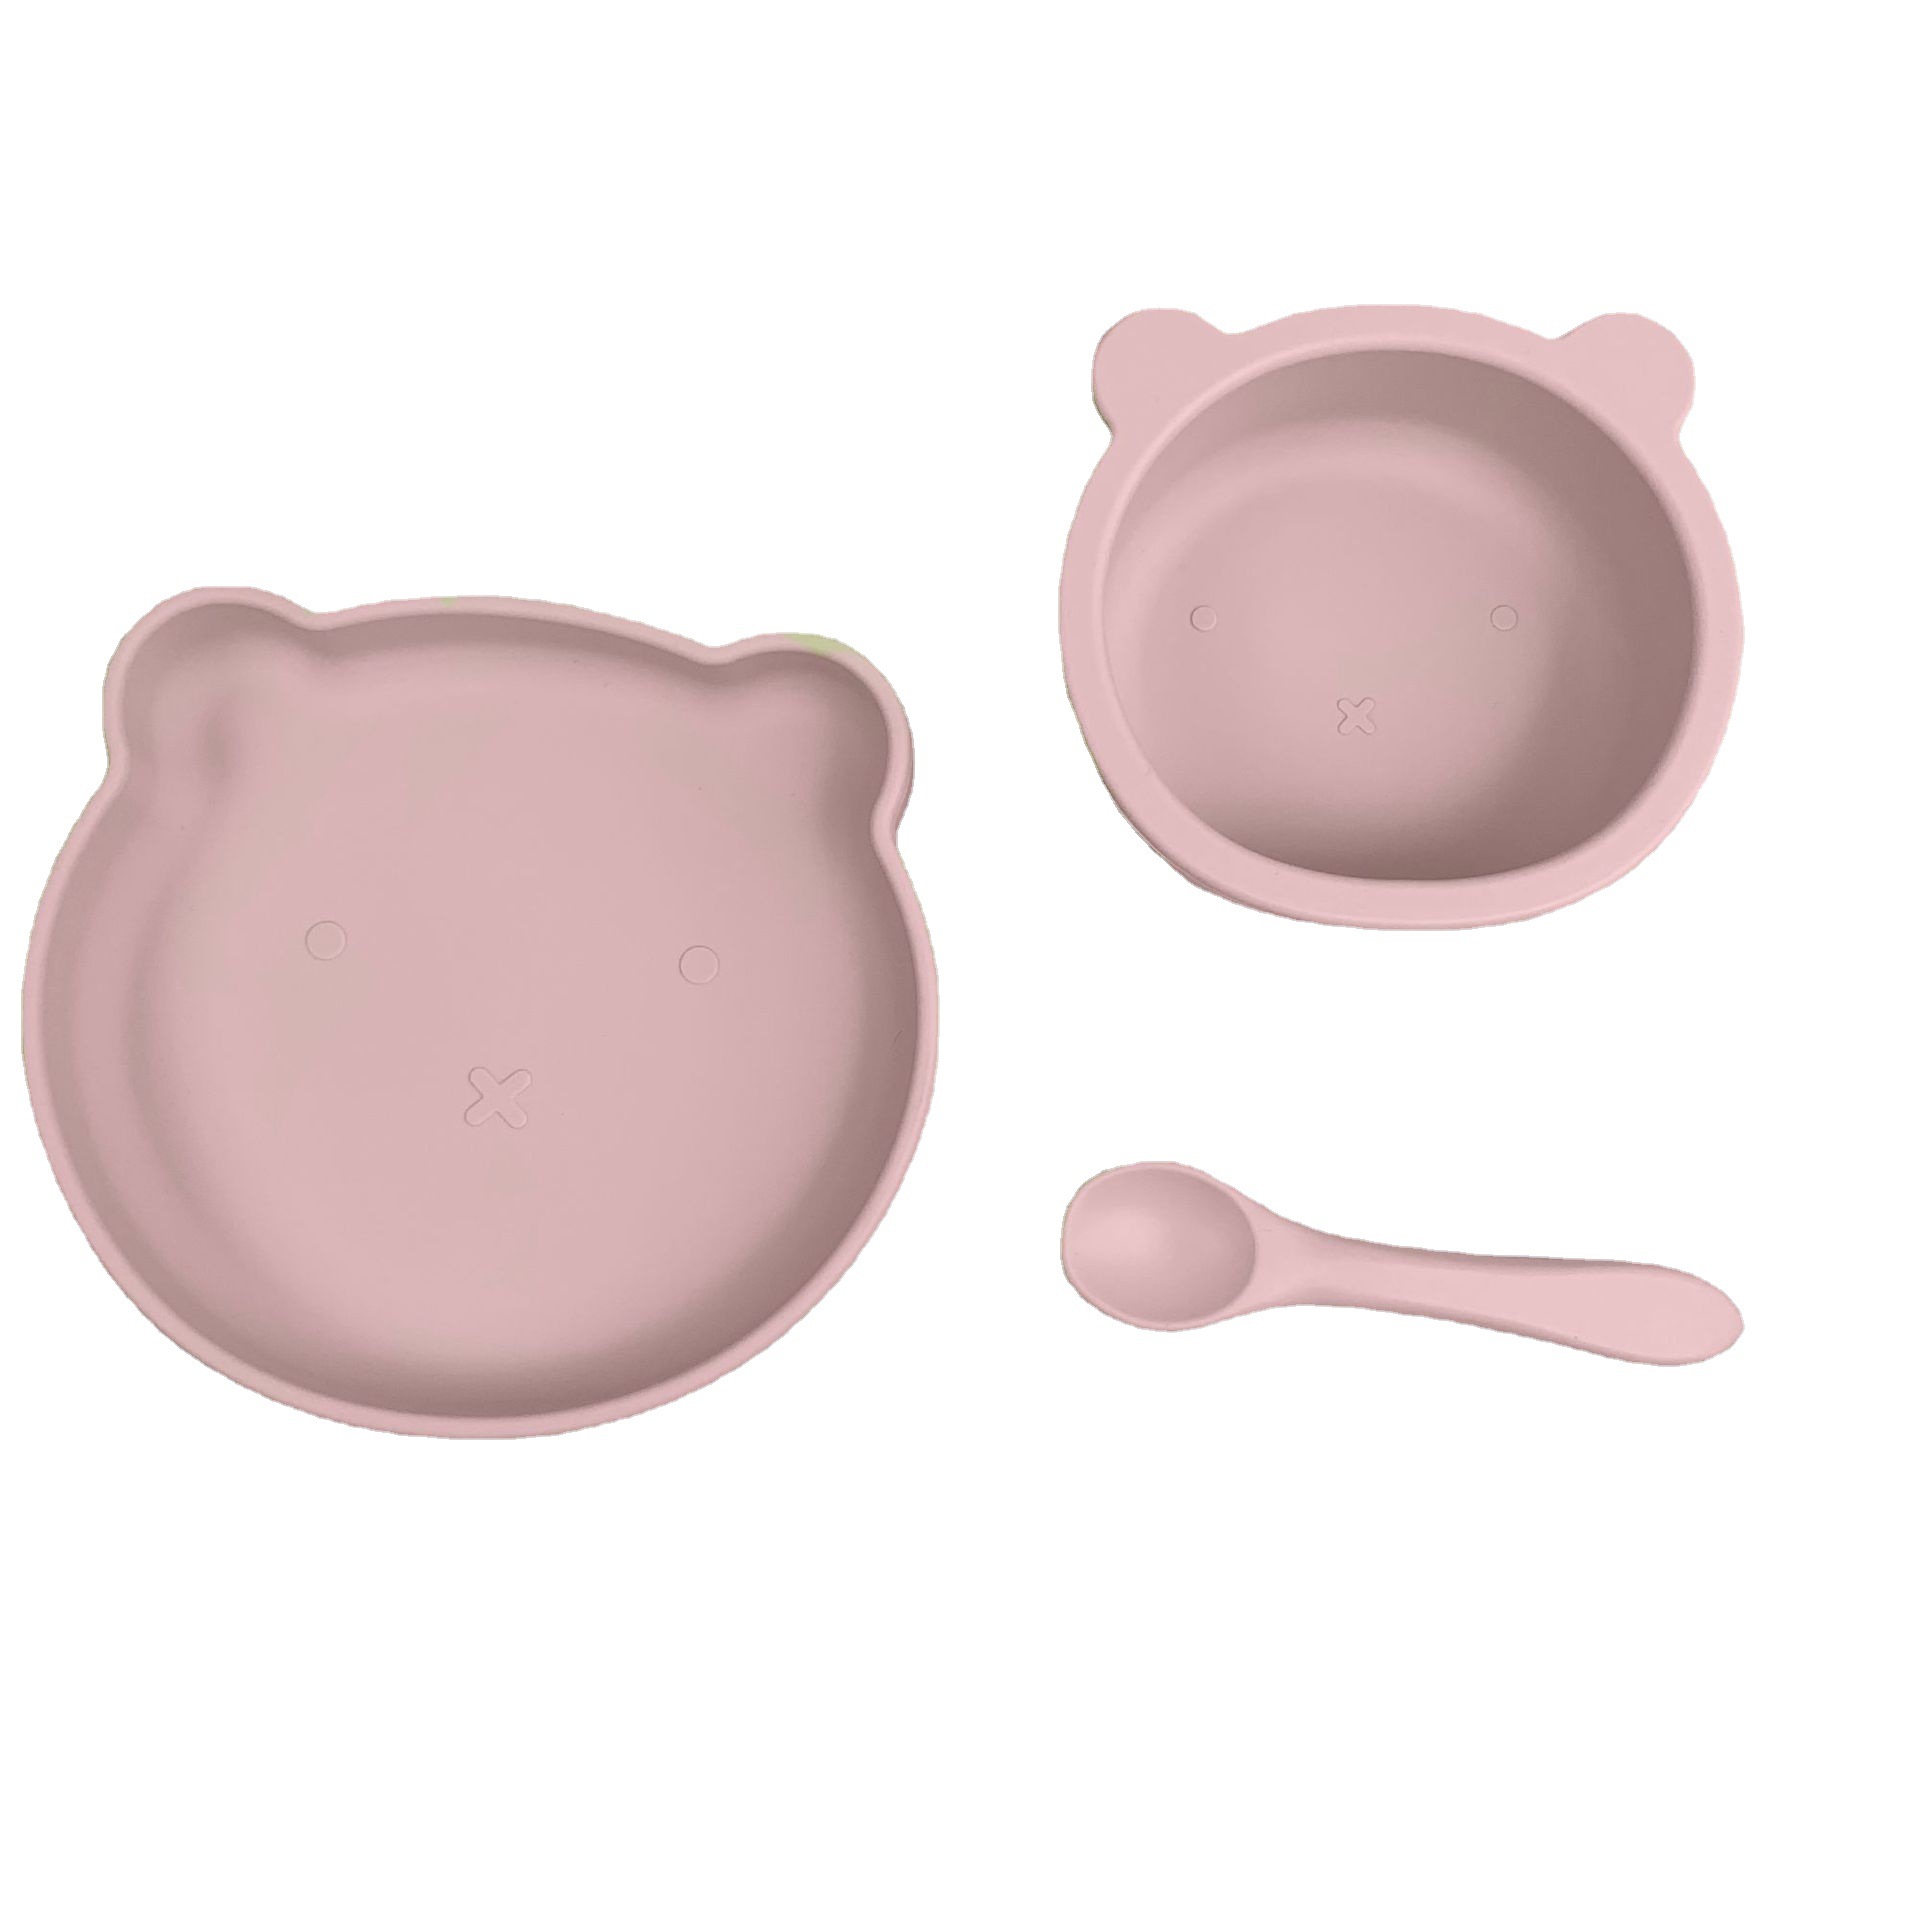 [recommended] Food Grade Silicone Baby Feeding Tableware Baby Complementary Food Eating Children Tableware Set 3-piece Set